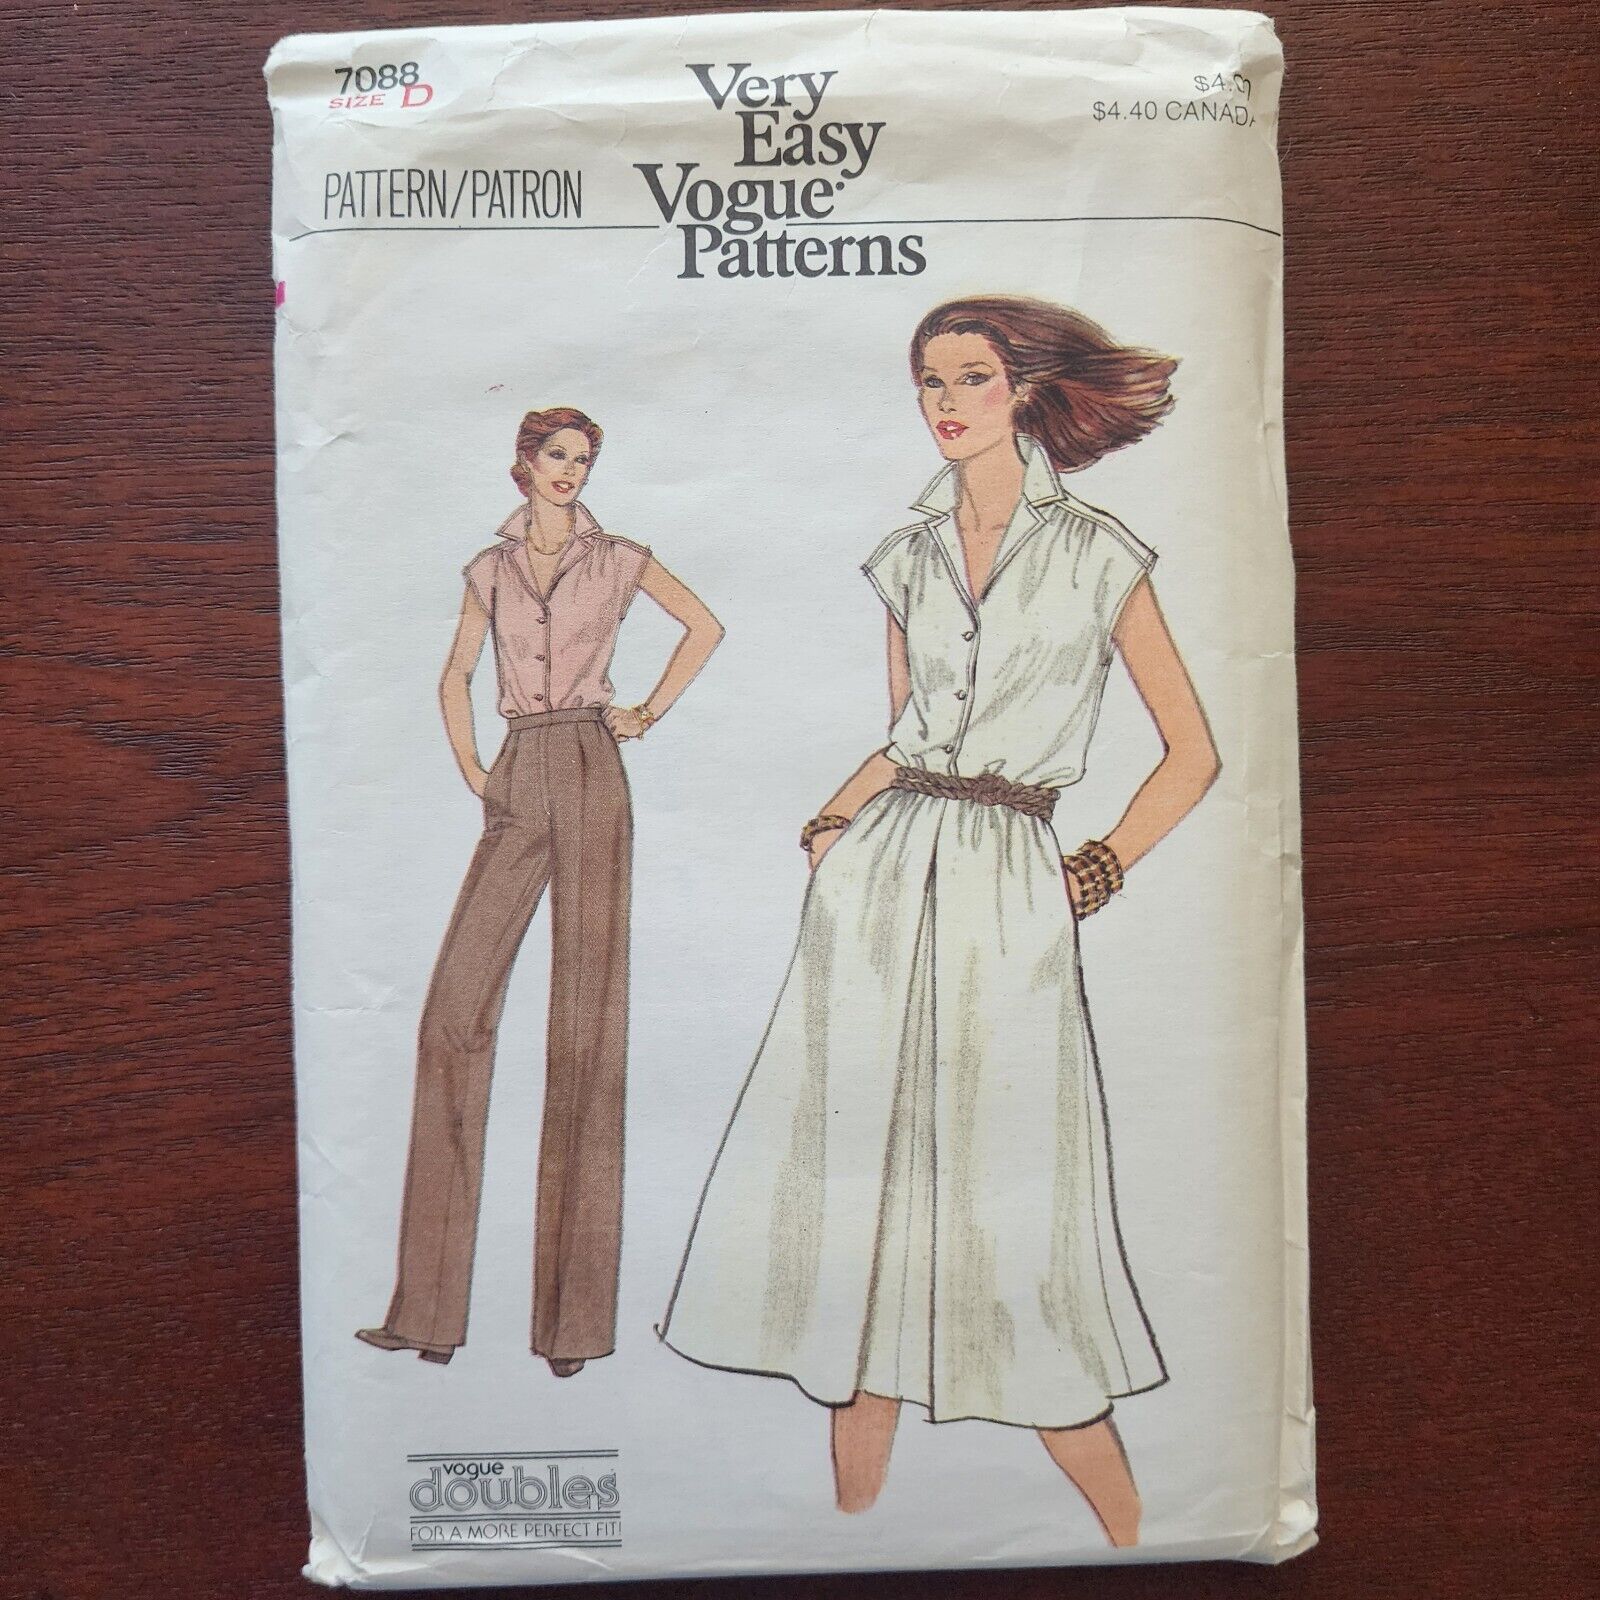 Very Easy Vogue Pattern 7088, Size D. Blouse, Skirt,  Pants. Cut, Complete